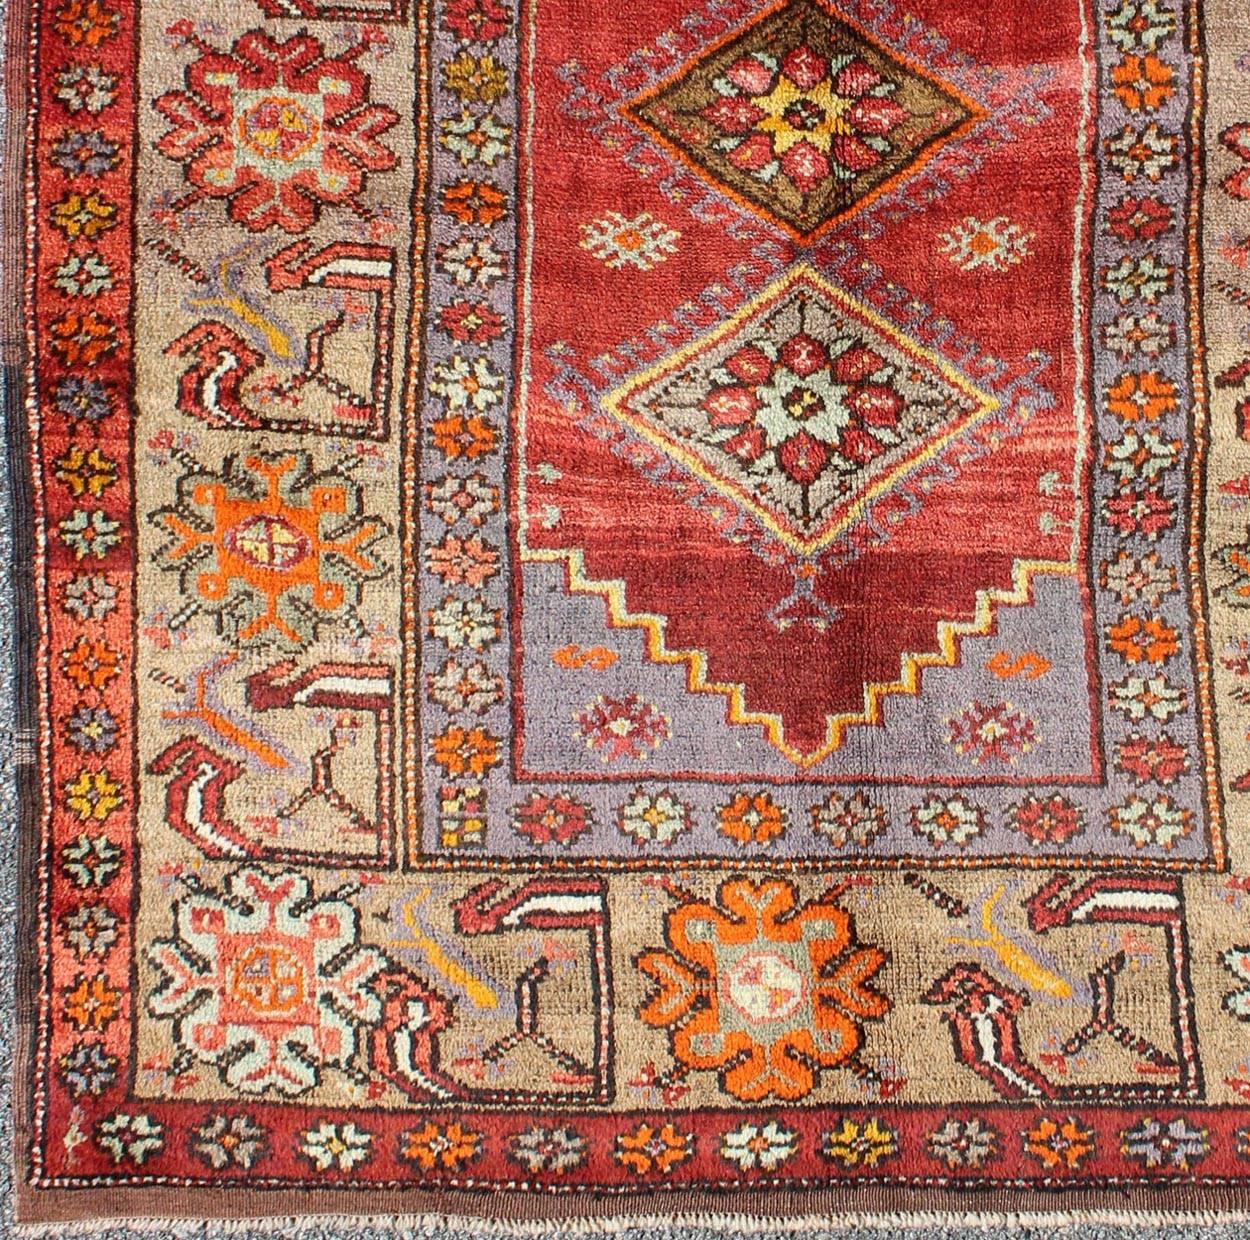 Square shape Antique Turkish Oushak Rug with Geometric Medallions & Floral Border, Keivan Woven Arts/ rug/ EN-140239 ,  Origin/Turkey, Hand Knotted in wool pile and wool foundation

Measures: 4'3 x 4'5

This vibrant Oushak rug features an